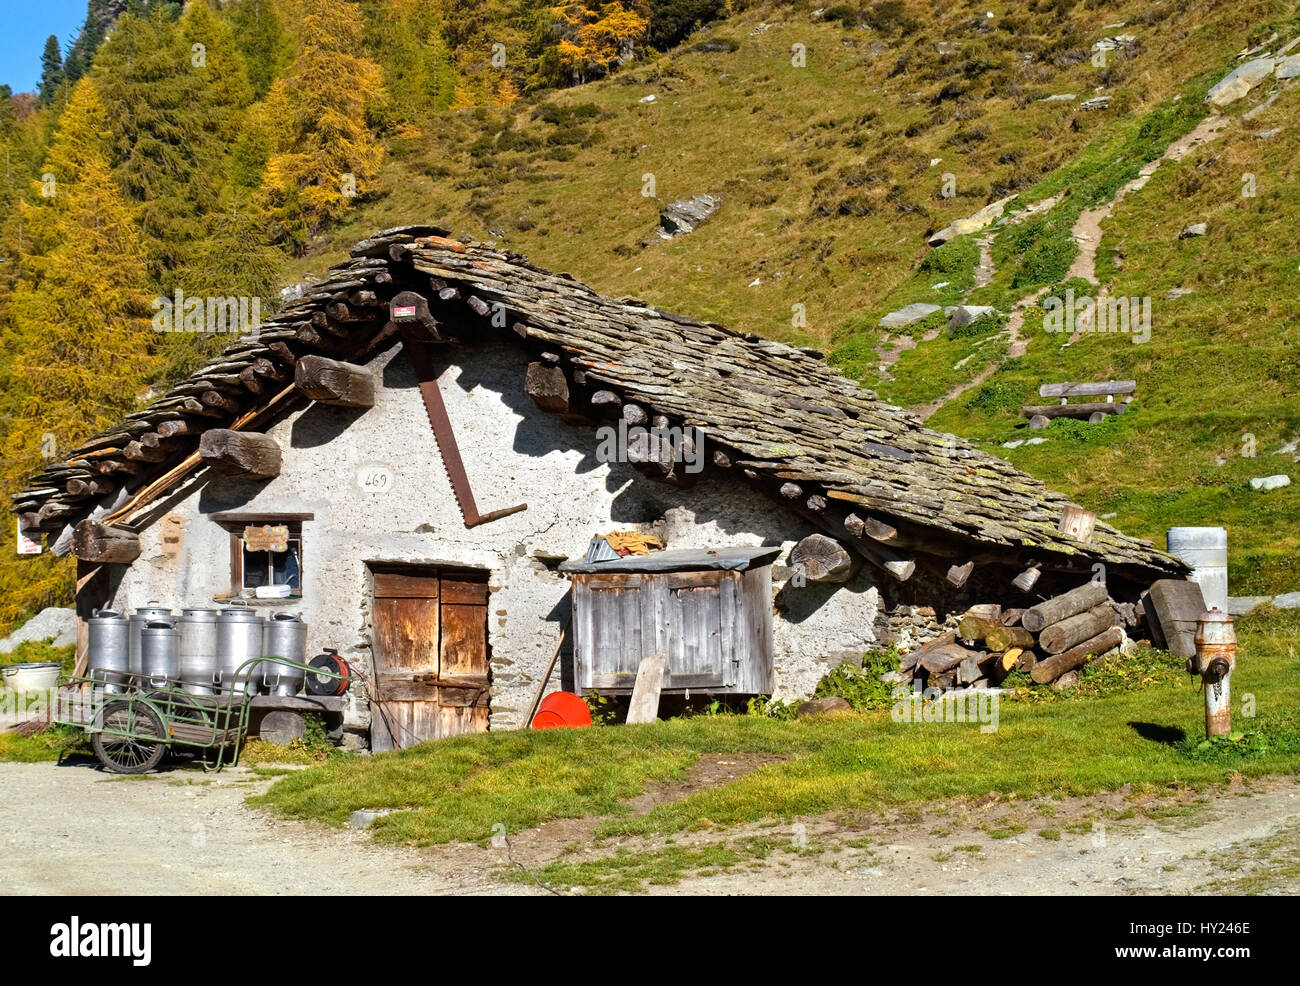 Goat barn in the traditional Swiss Village Isola at the Lake Sils, Engadin, Switzerland. Stock Photo